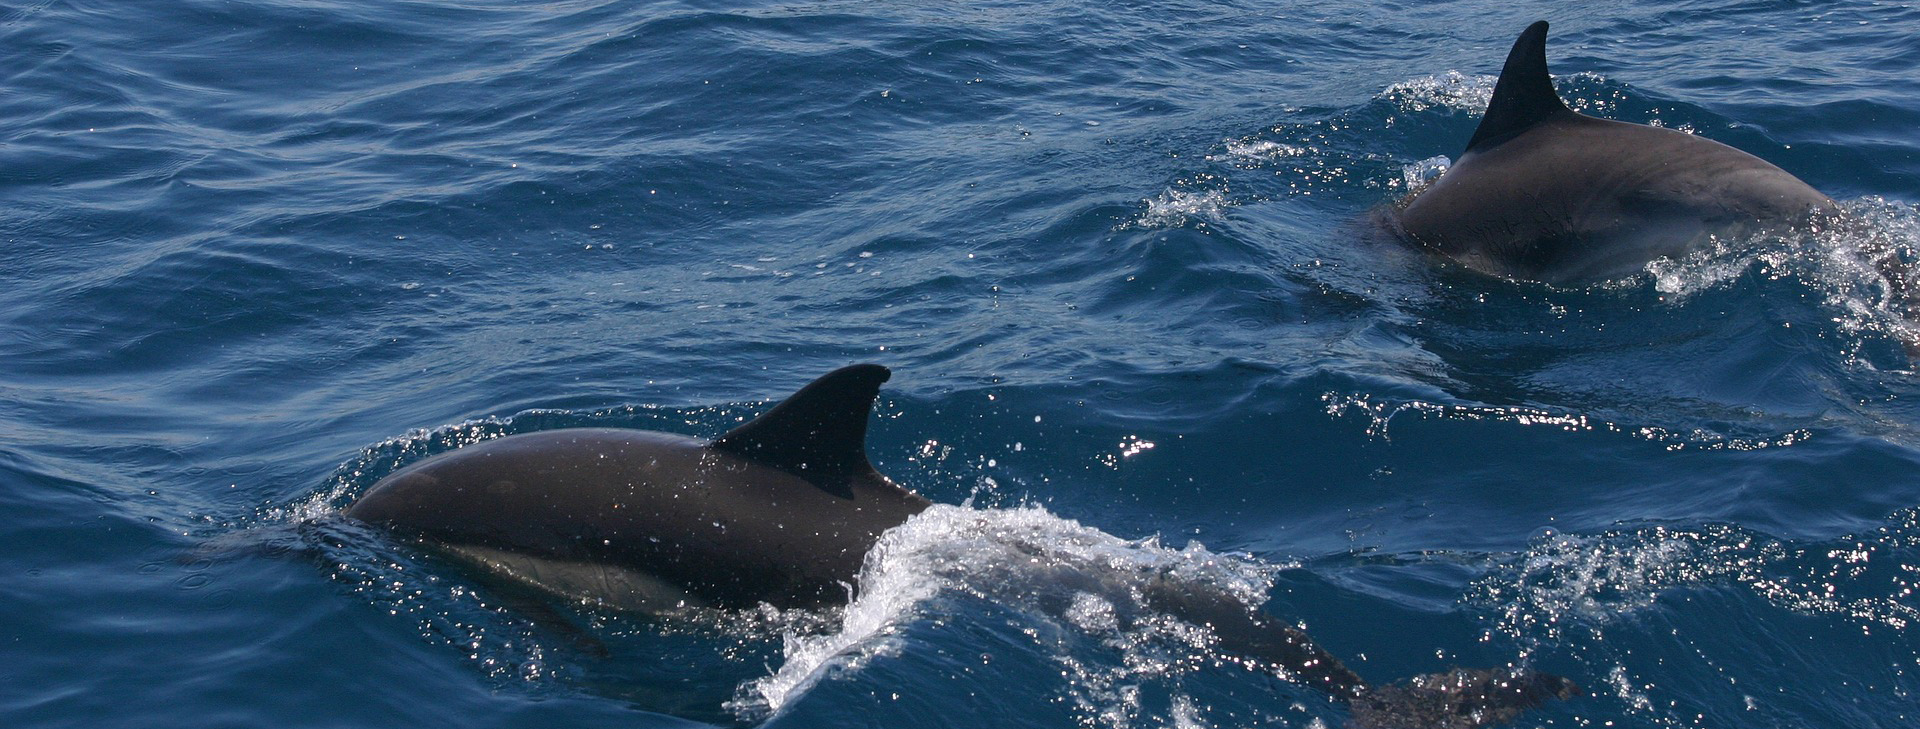 Wildlife abounds in the area - look out for porpoises on the loch